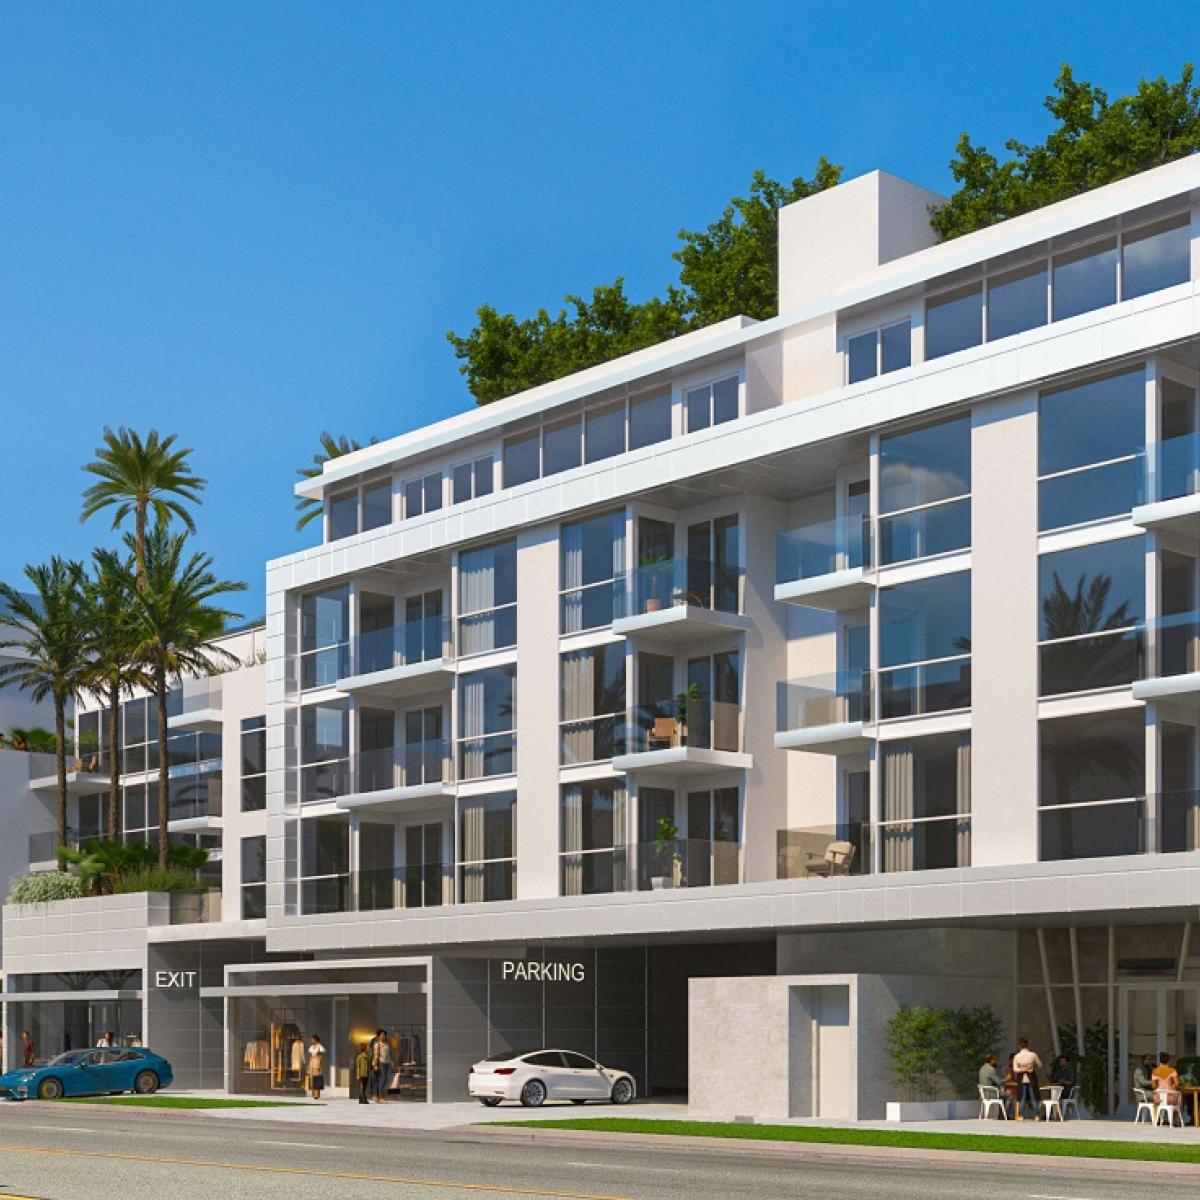 Cheval Blanc Nears Approval by Planning Commission - Beverly Hills